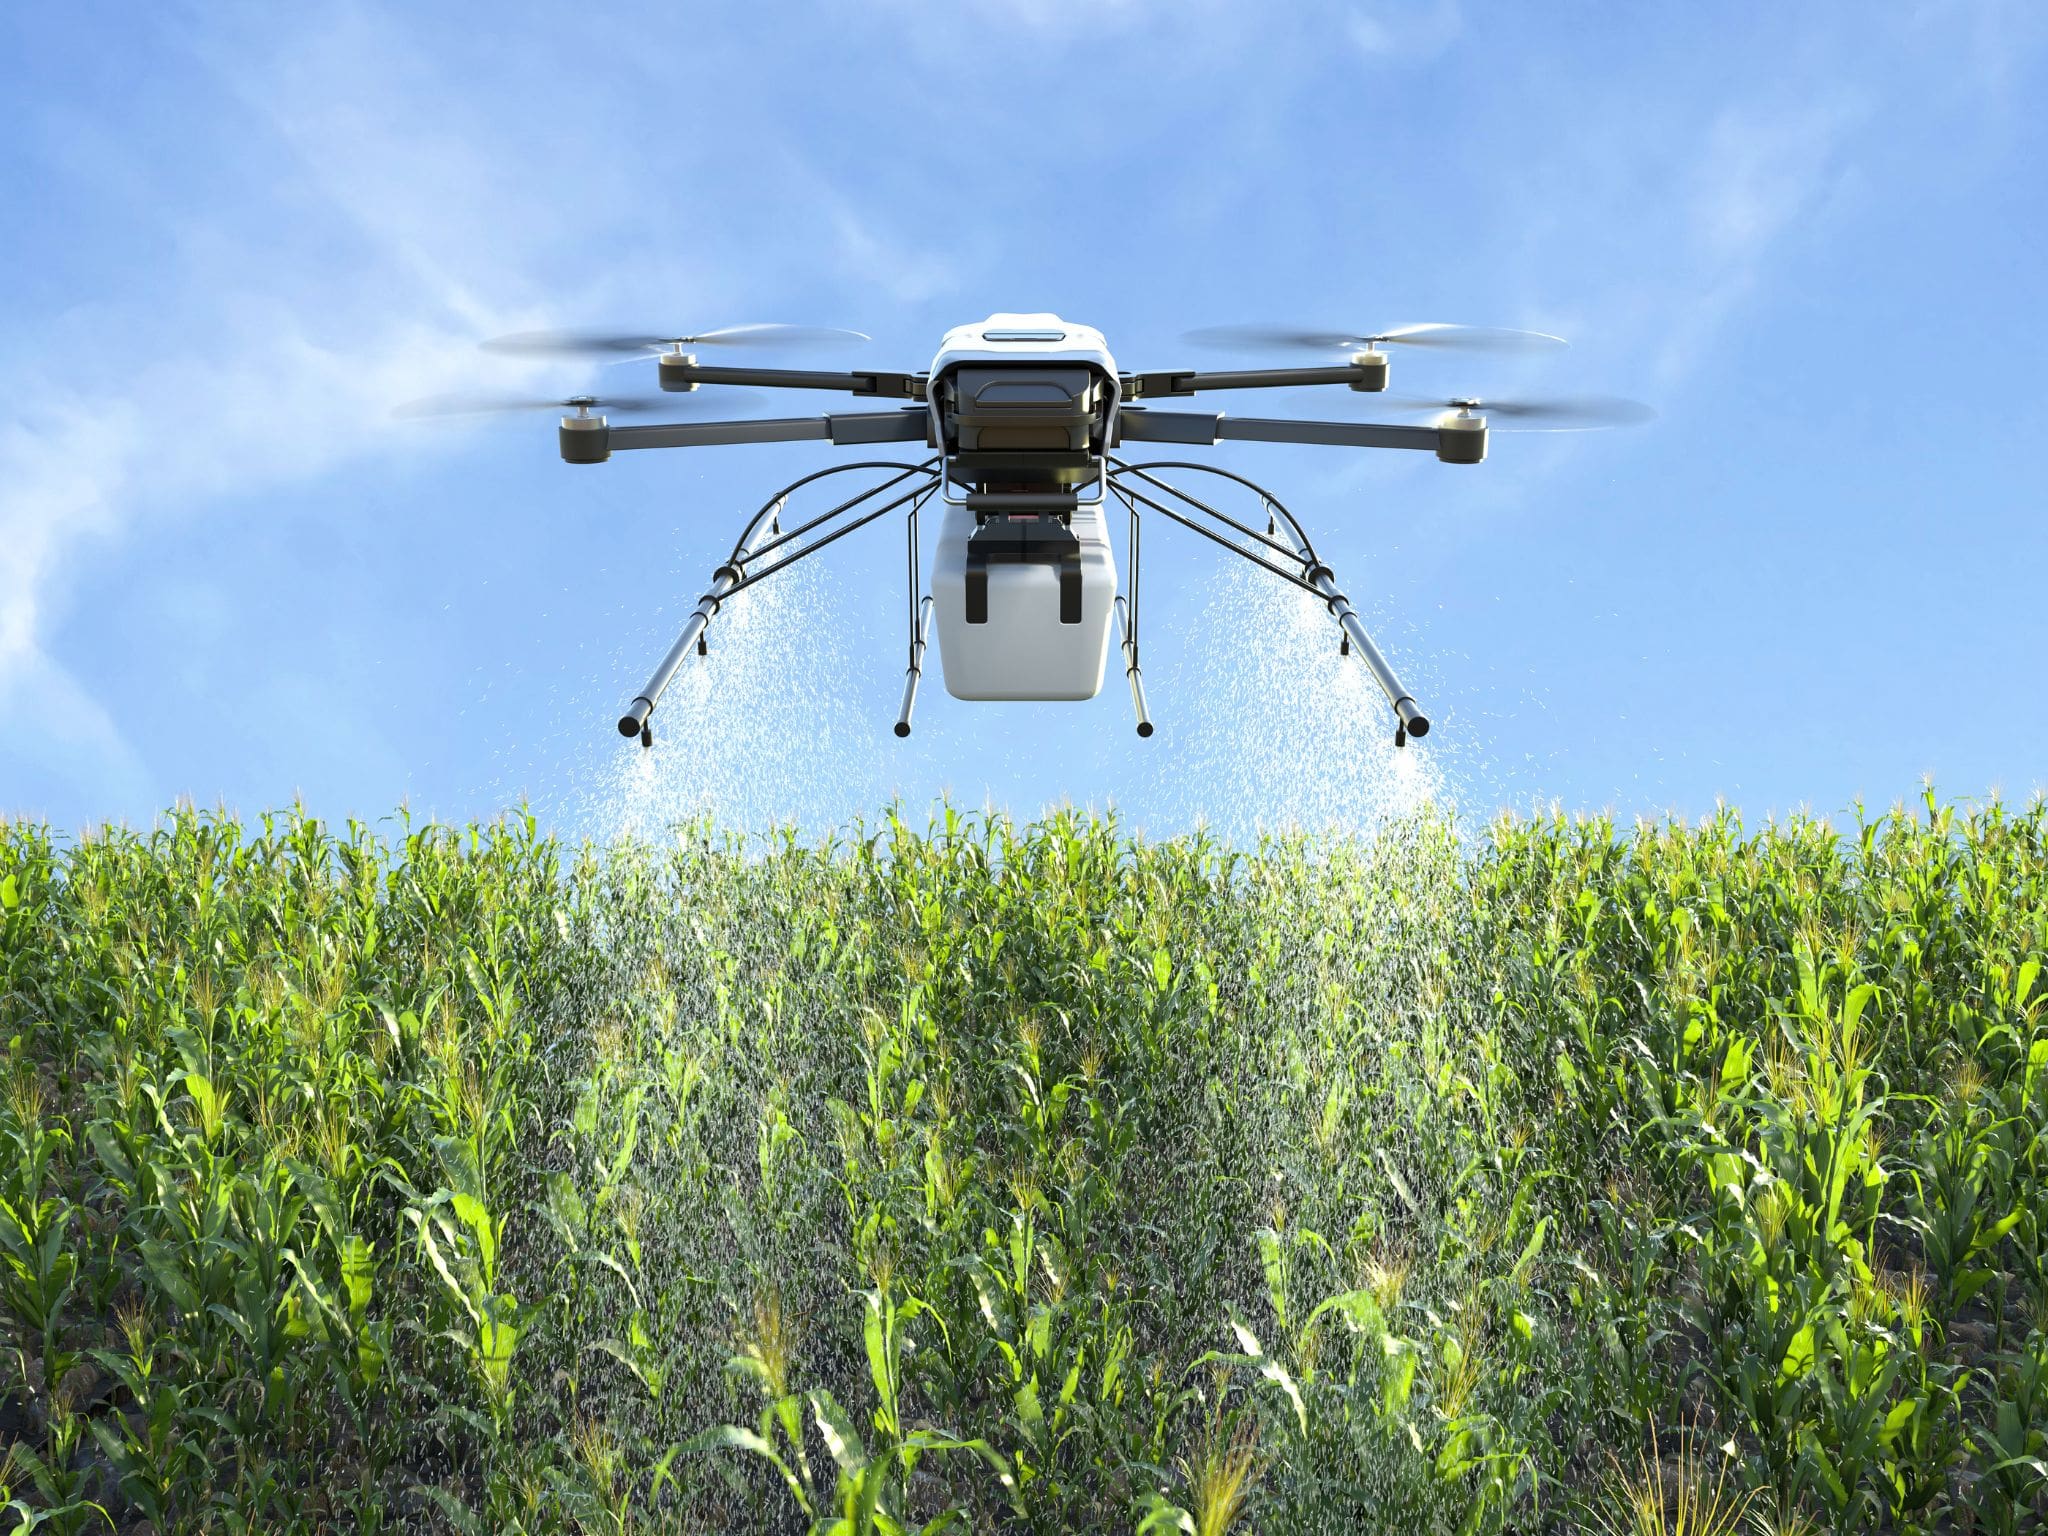 Drones spraying water on crops